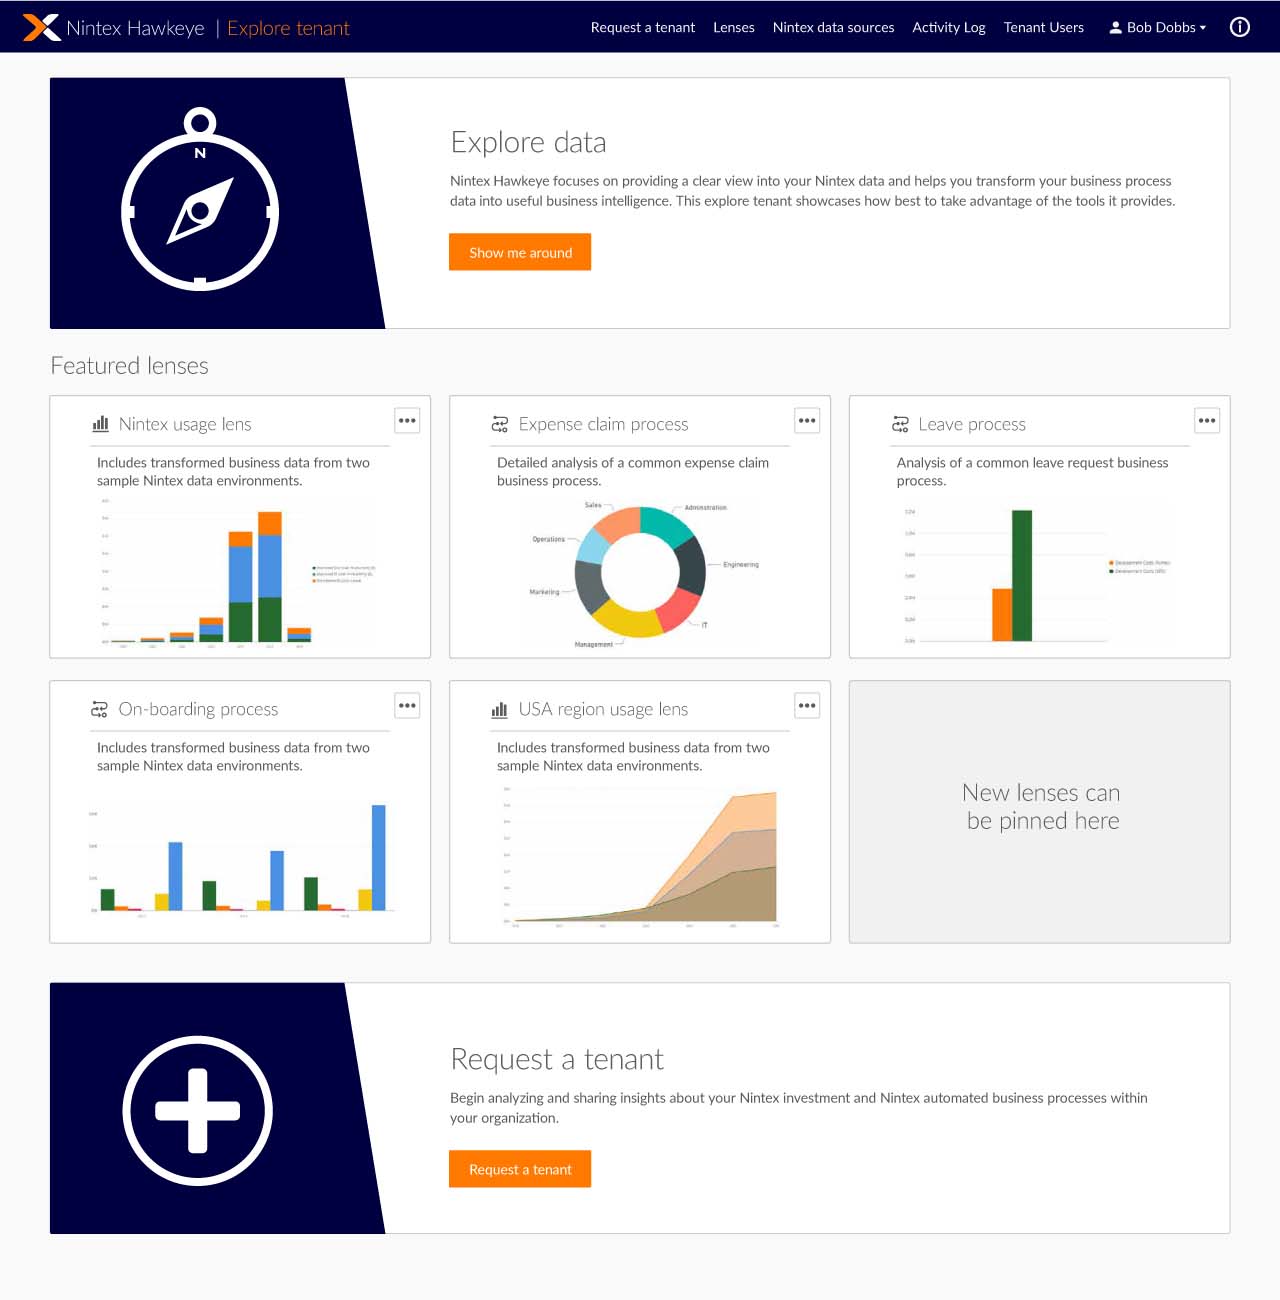 Nintex Hawkeye’s Explorer Tenant features pre-populated processes so users can experience sample data and dashboards. 